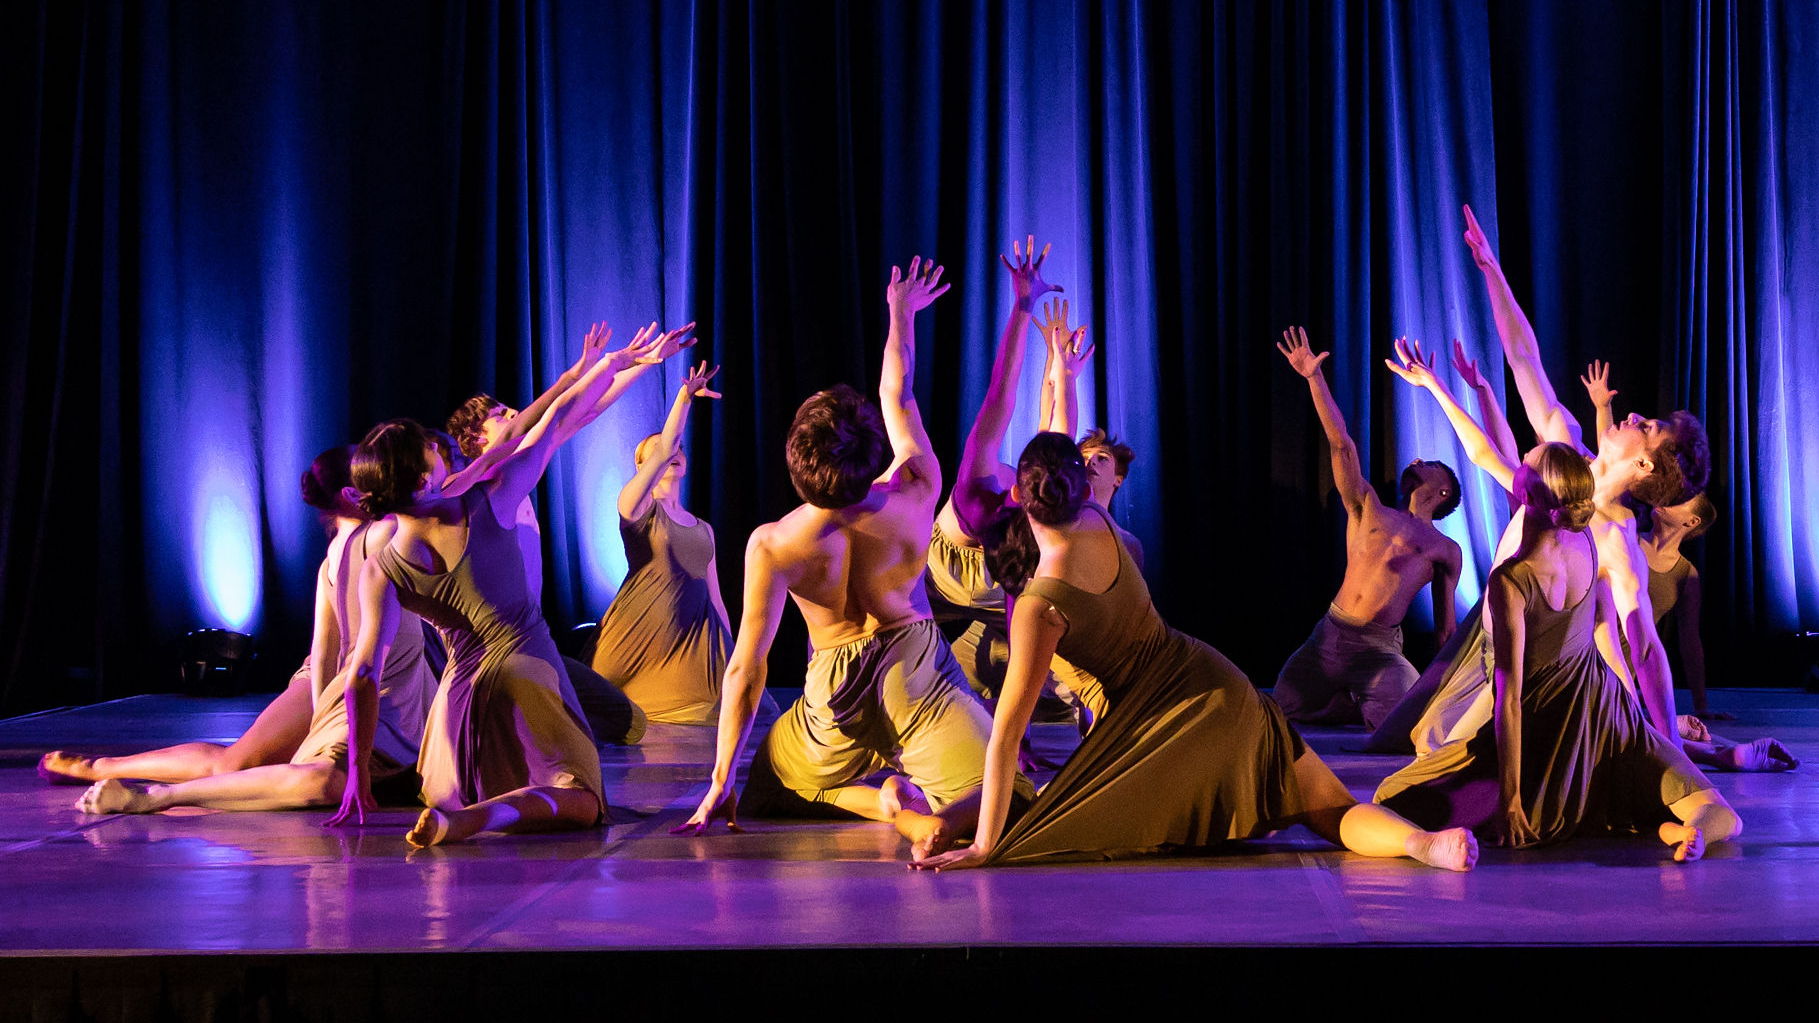 Chicago Academy for the Arts Dance Department Performs "Storm" choregraphed by Dance Department Chair Randy Duncan
(CREDIT: Michele Marie Photography MicheleMariePhotography.com)